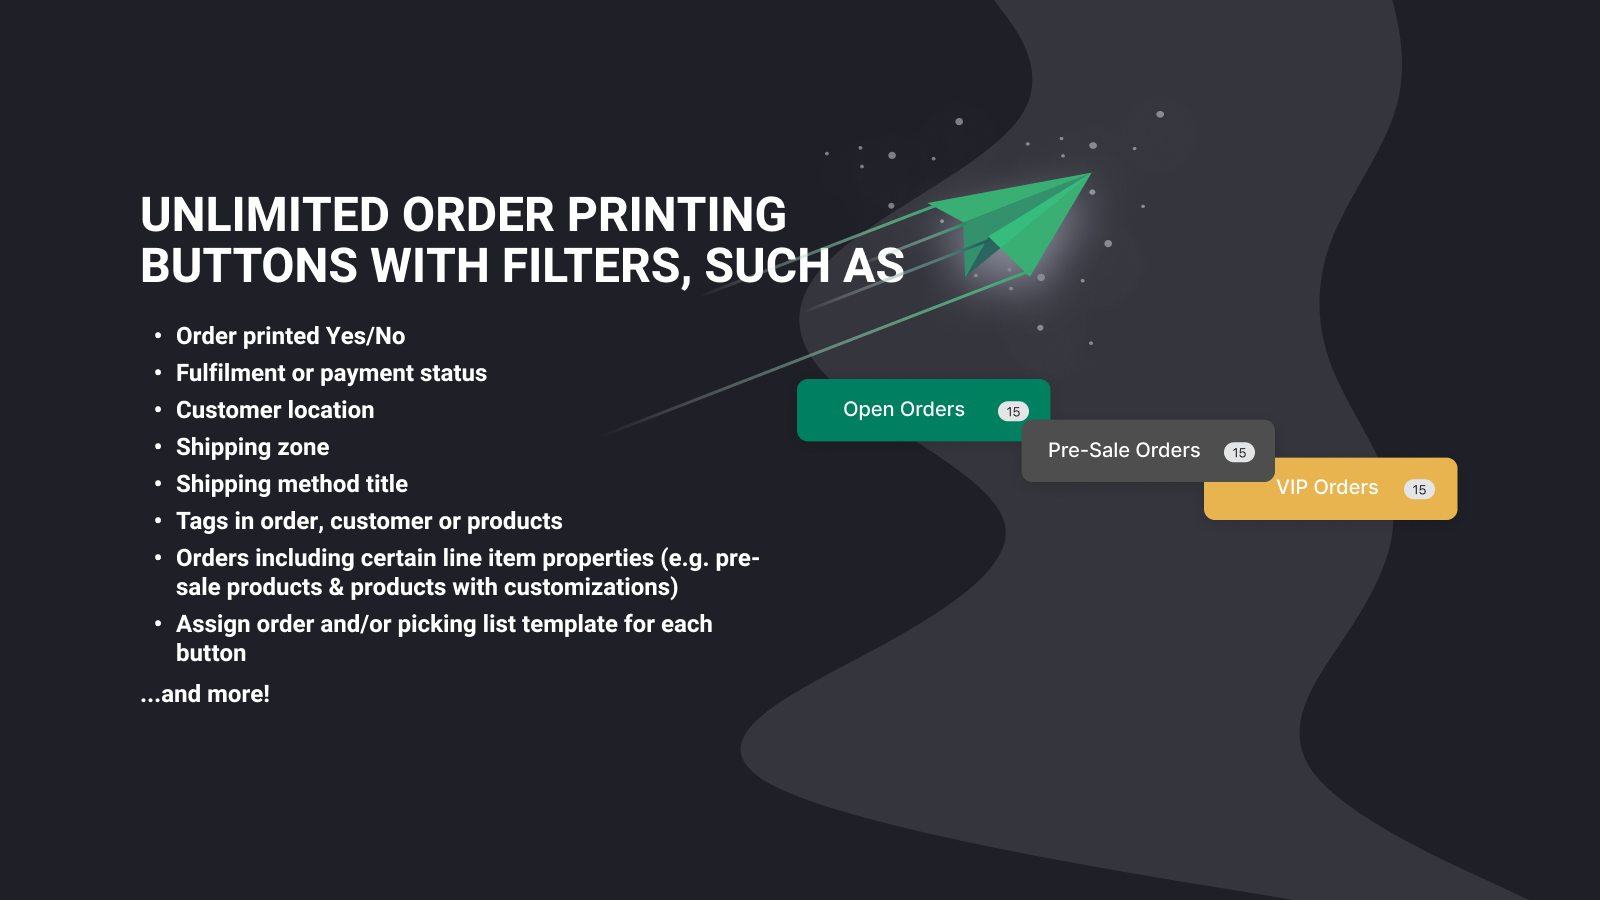 Filter your orders under customizable print buttons